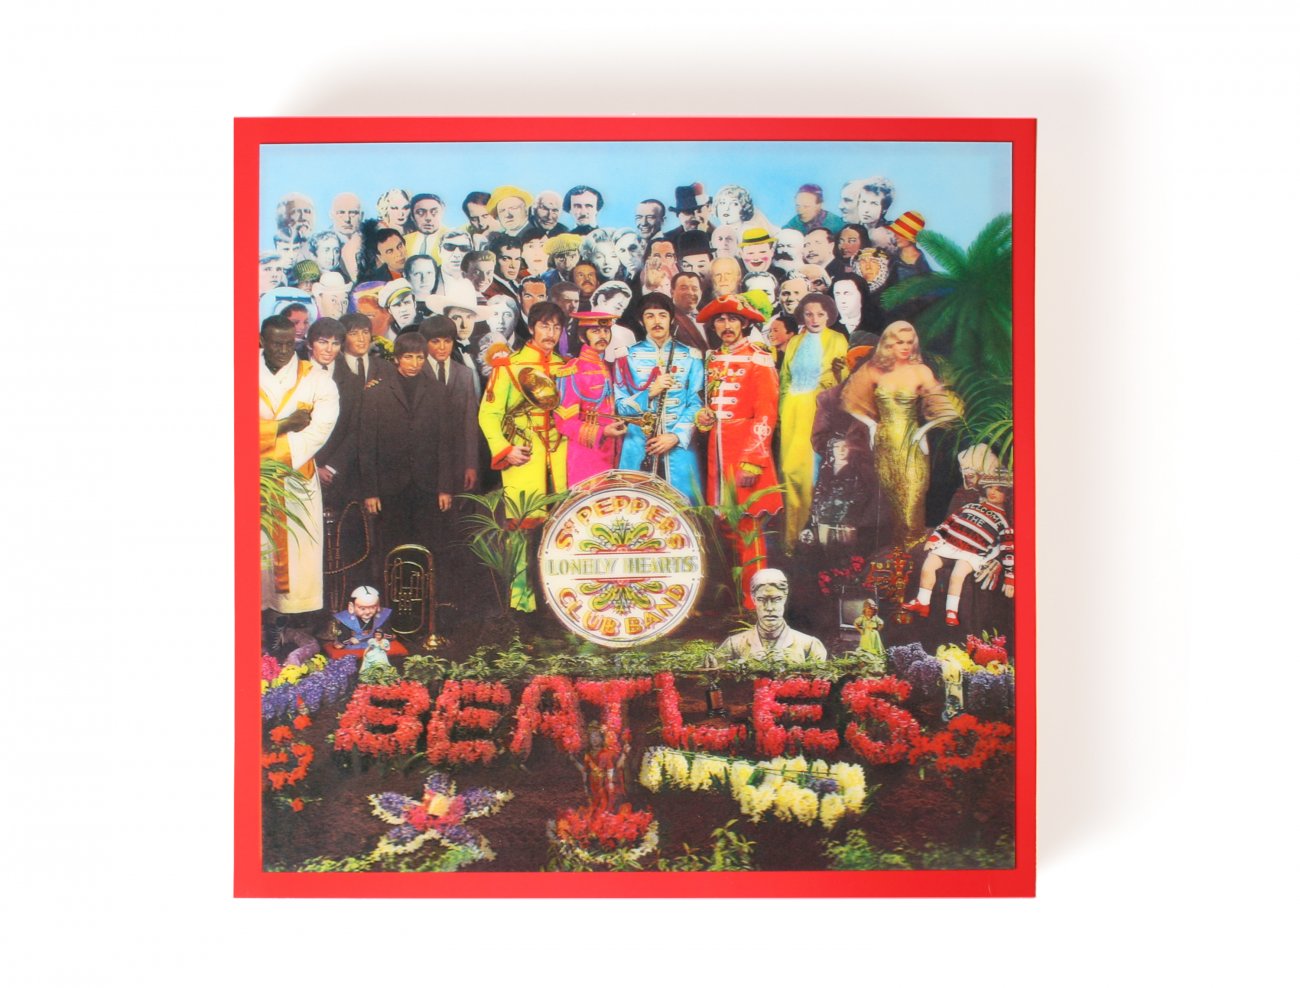 deluxe box sgt pepper